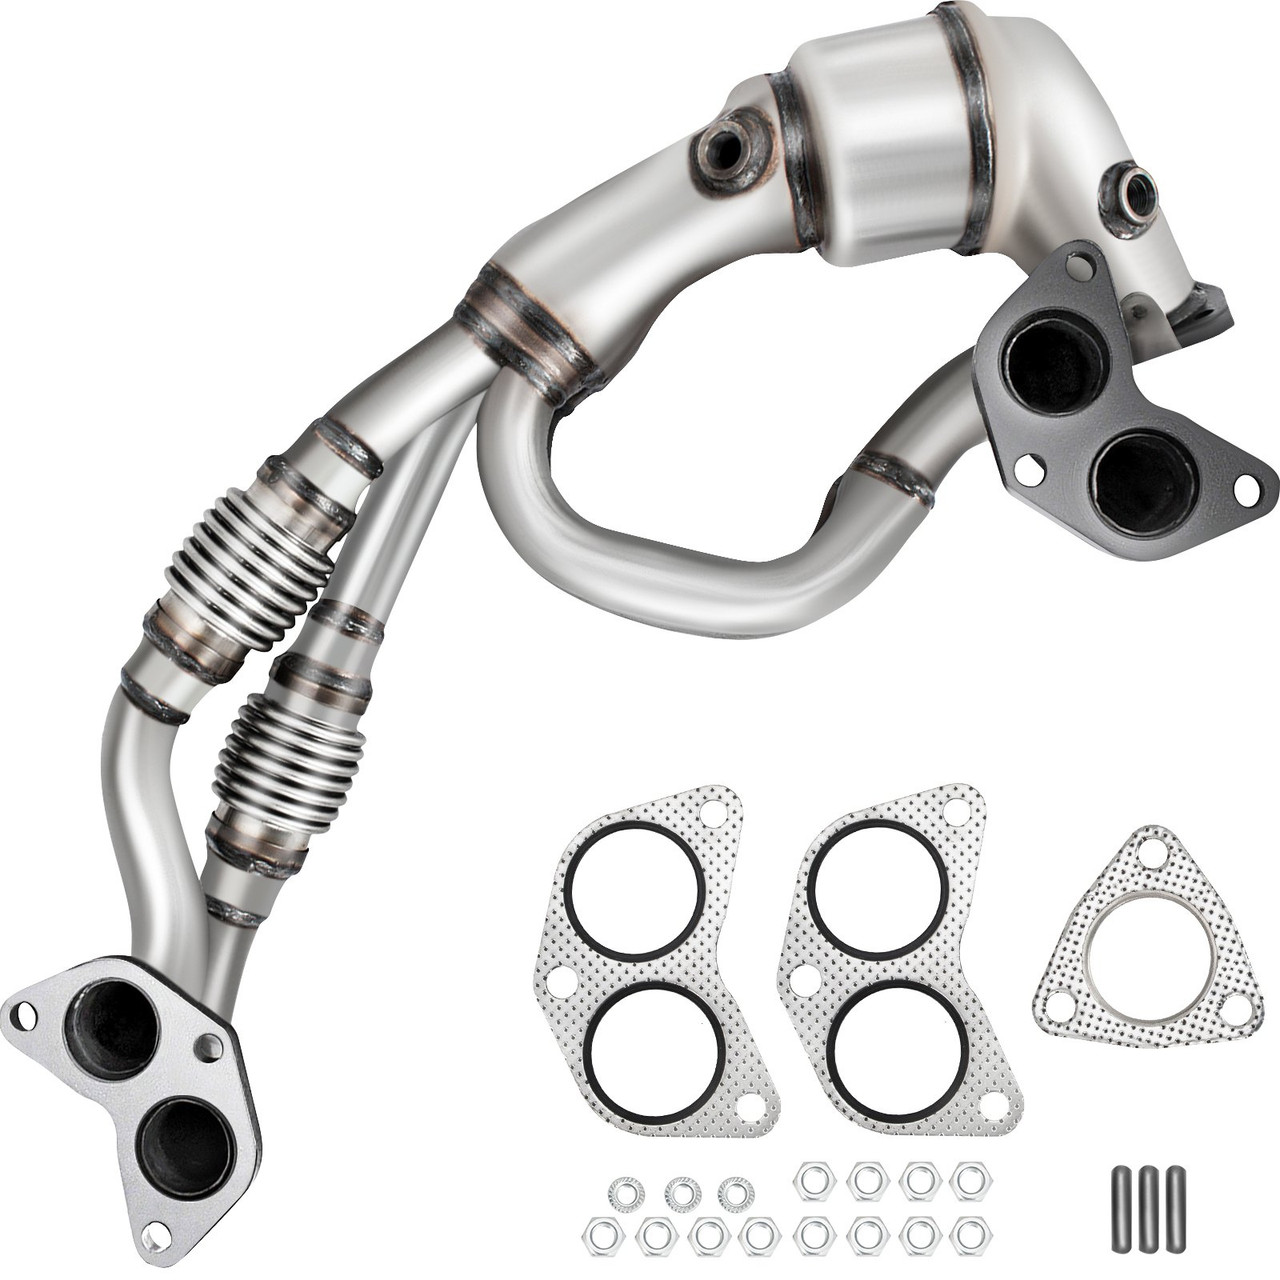 Catalytic Converter Direct Fit Front Exhaust Manifold High Flow Catalytic Converter Compatible with Subaru Impreza, Legacy, Forester, Outback, 06-12, 4 Cyl 2.5L Except Turbo W/Gasket Kit